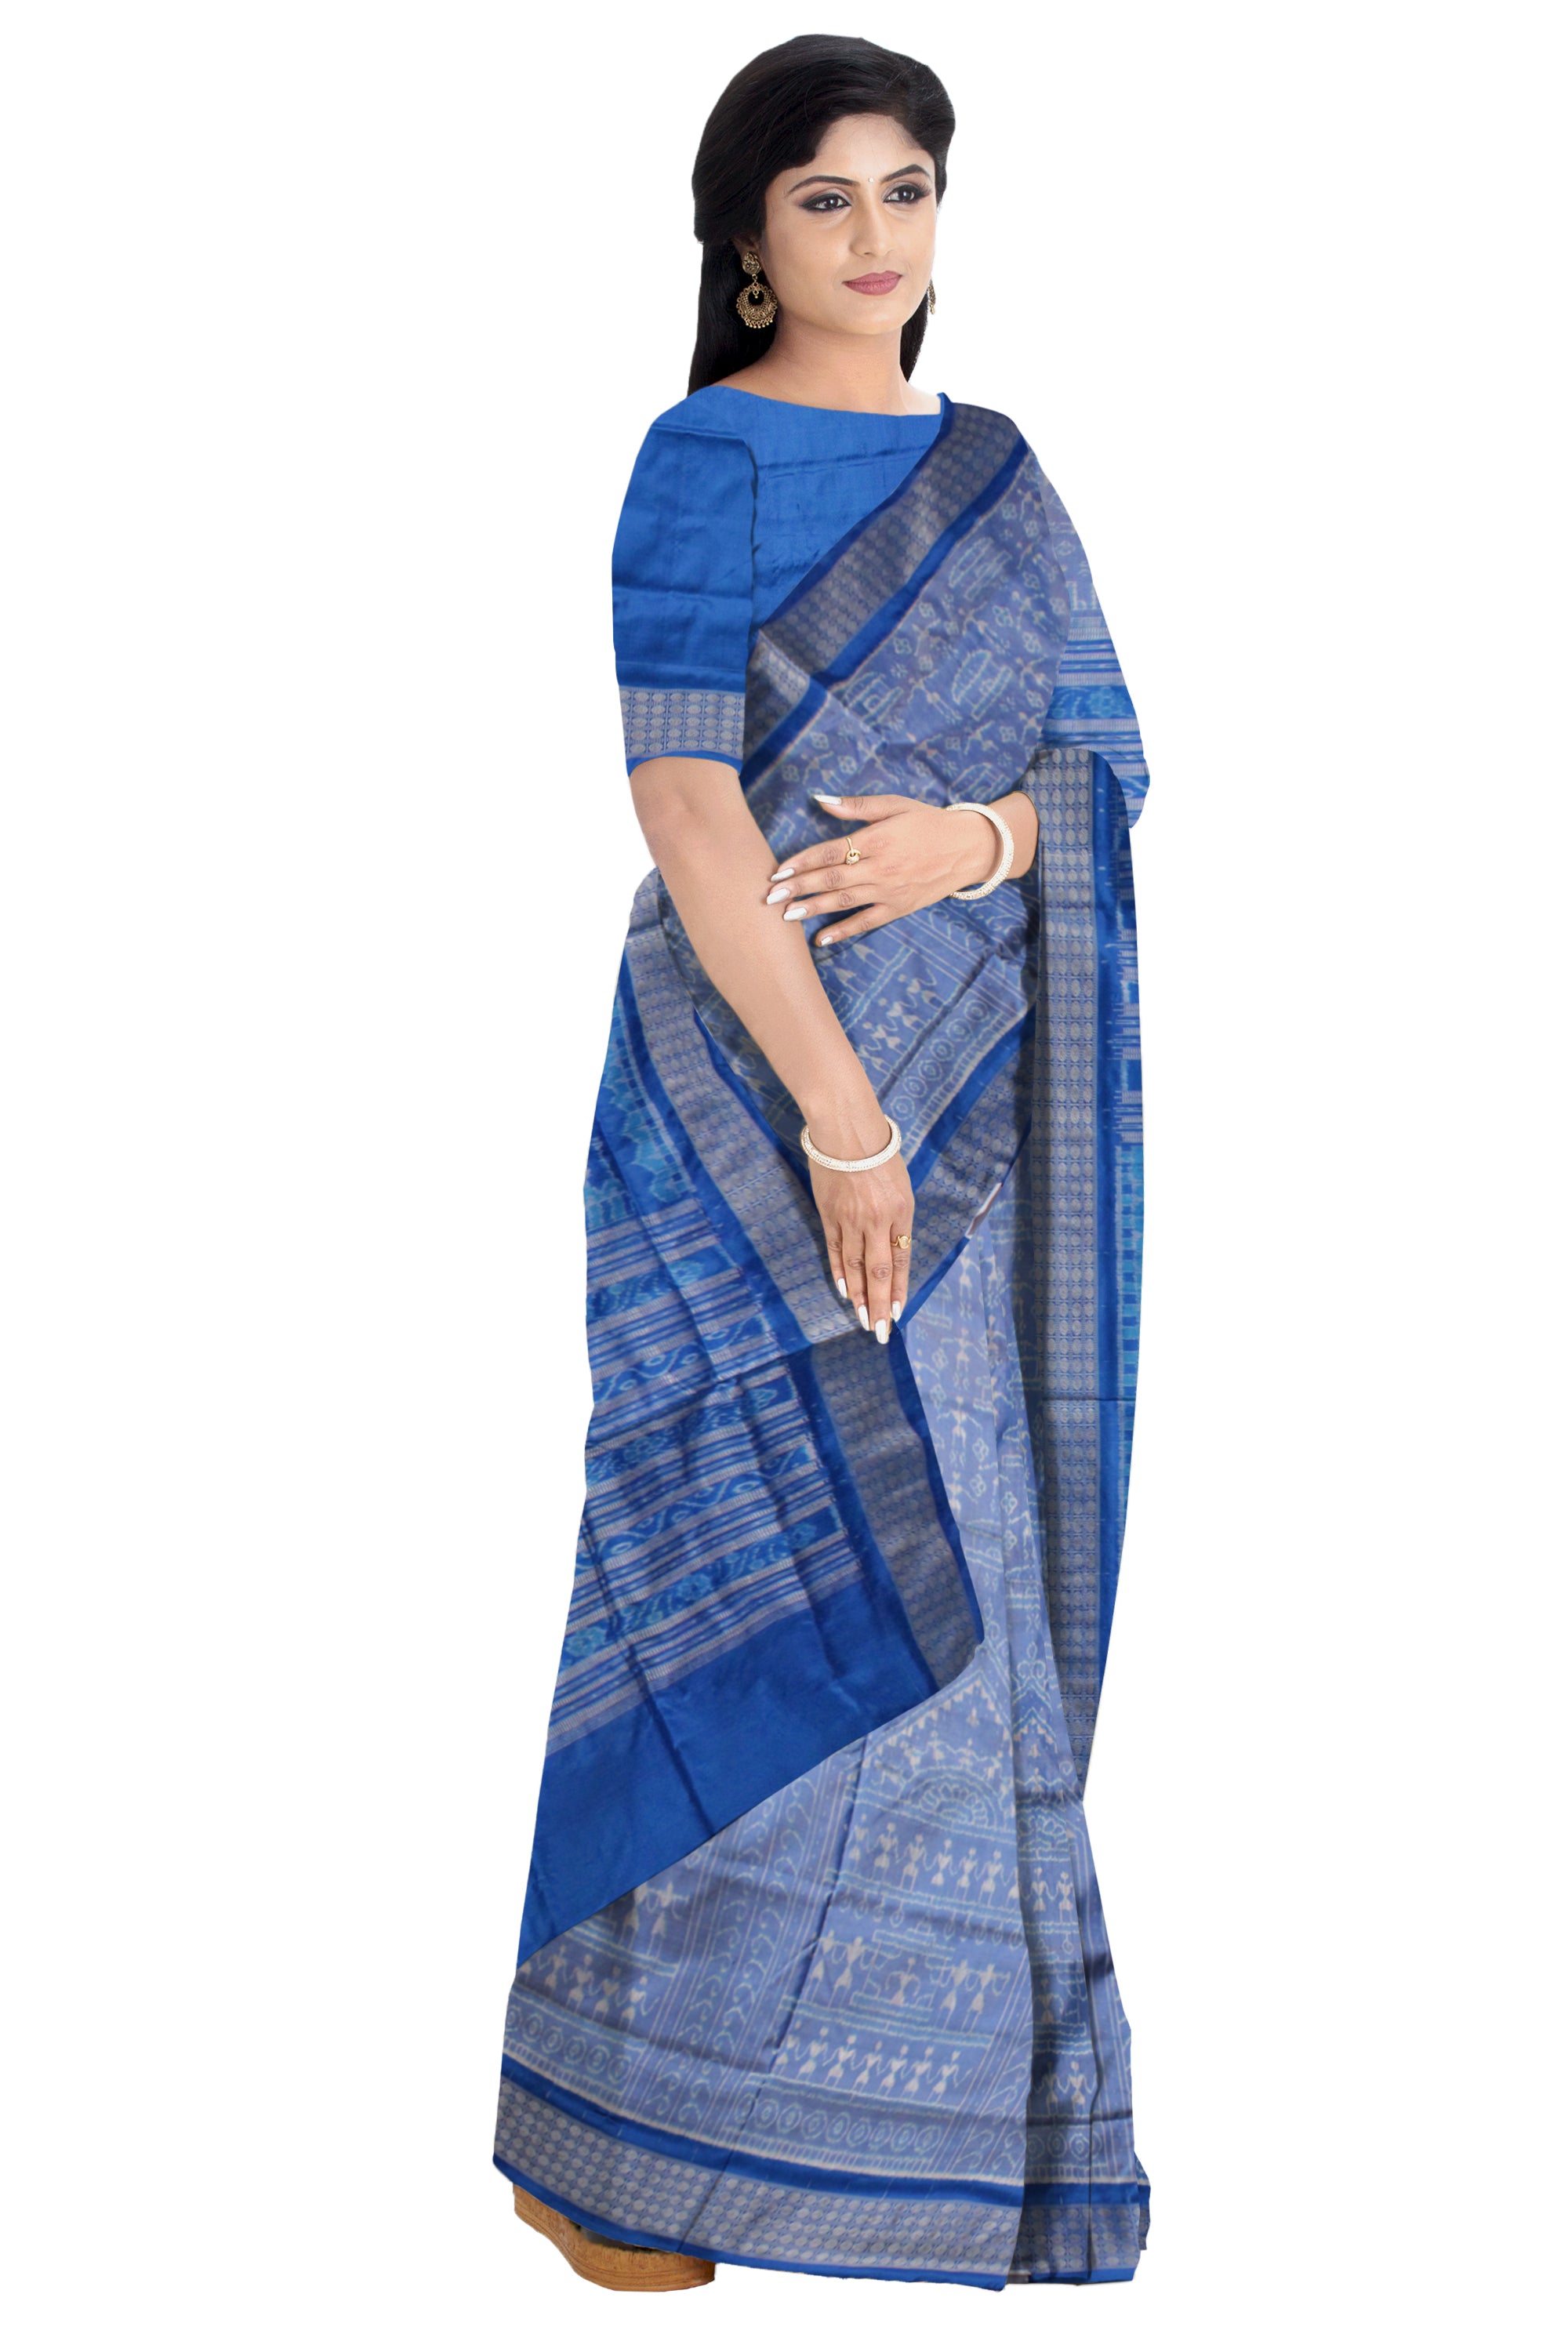 WHOLE BODY TERRACOTTA PATTERN PURE SILK SAREE IS LIGHT SKY COLOR BASE,WITH MATCHING BLOUSE PIECE. - Koshali Arts & Crafts Enterprise